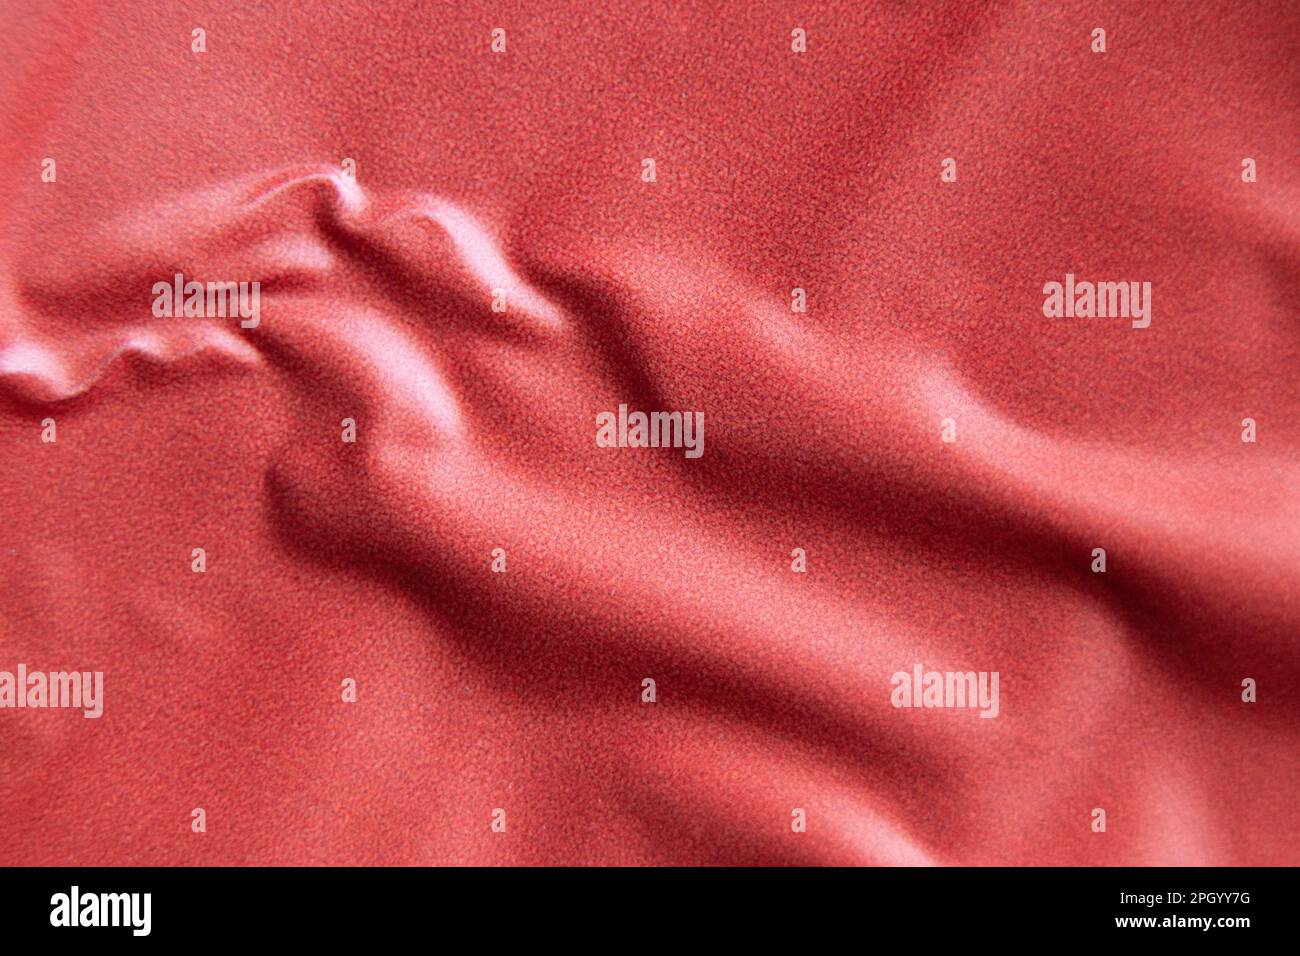 dark red glossy paper as background for design Stock Photo